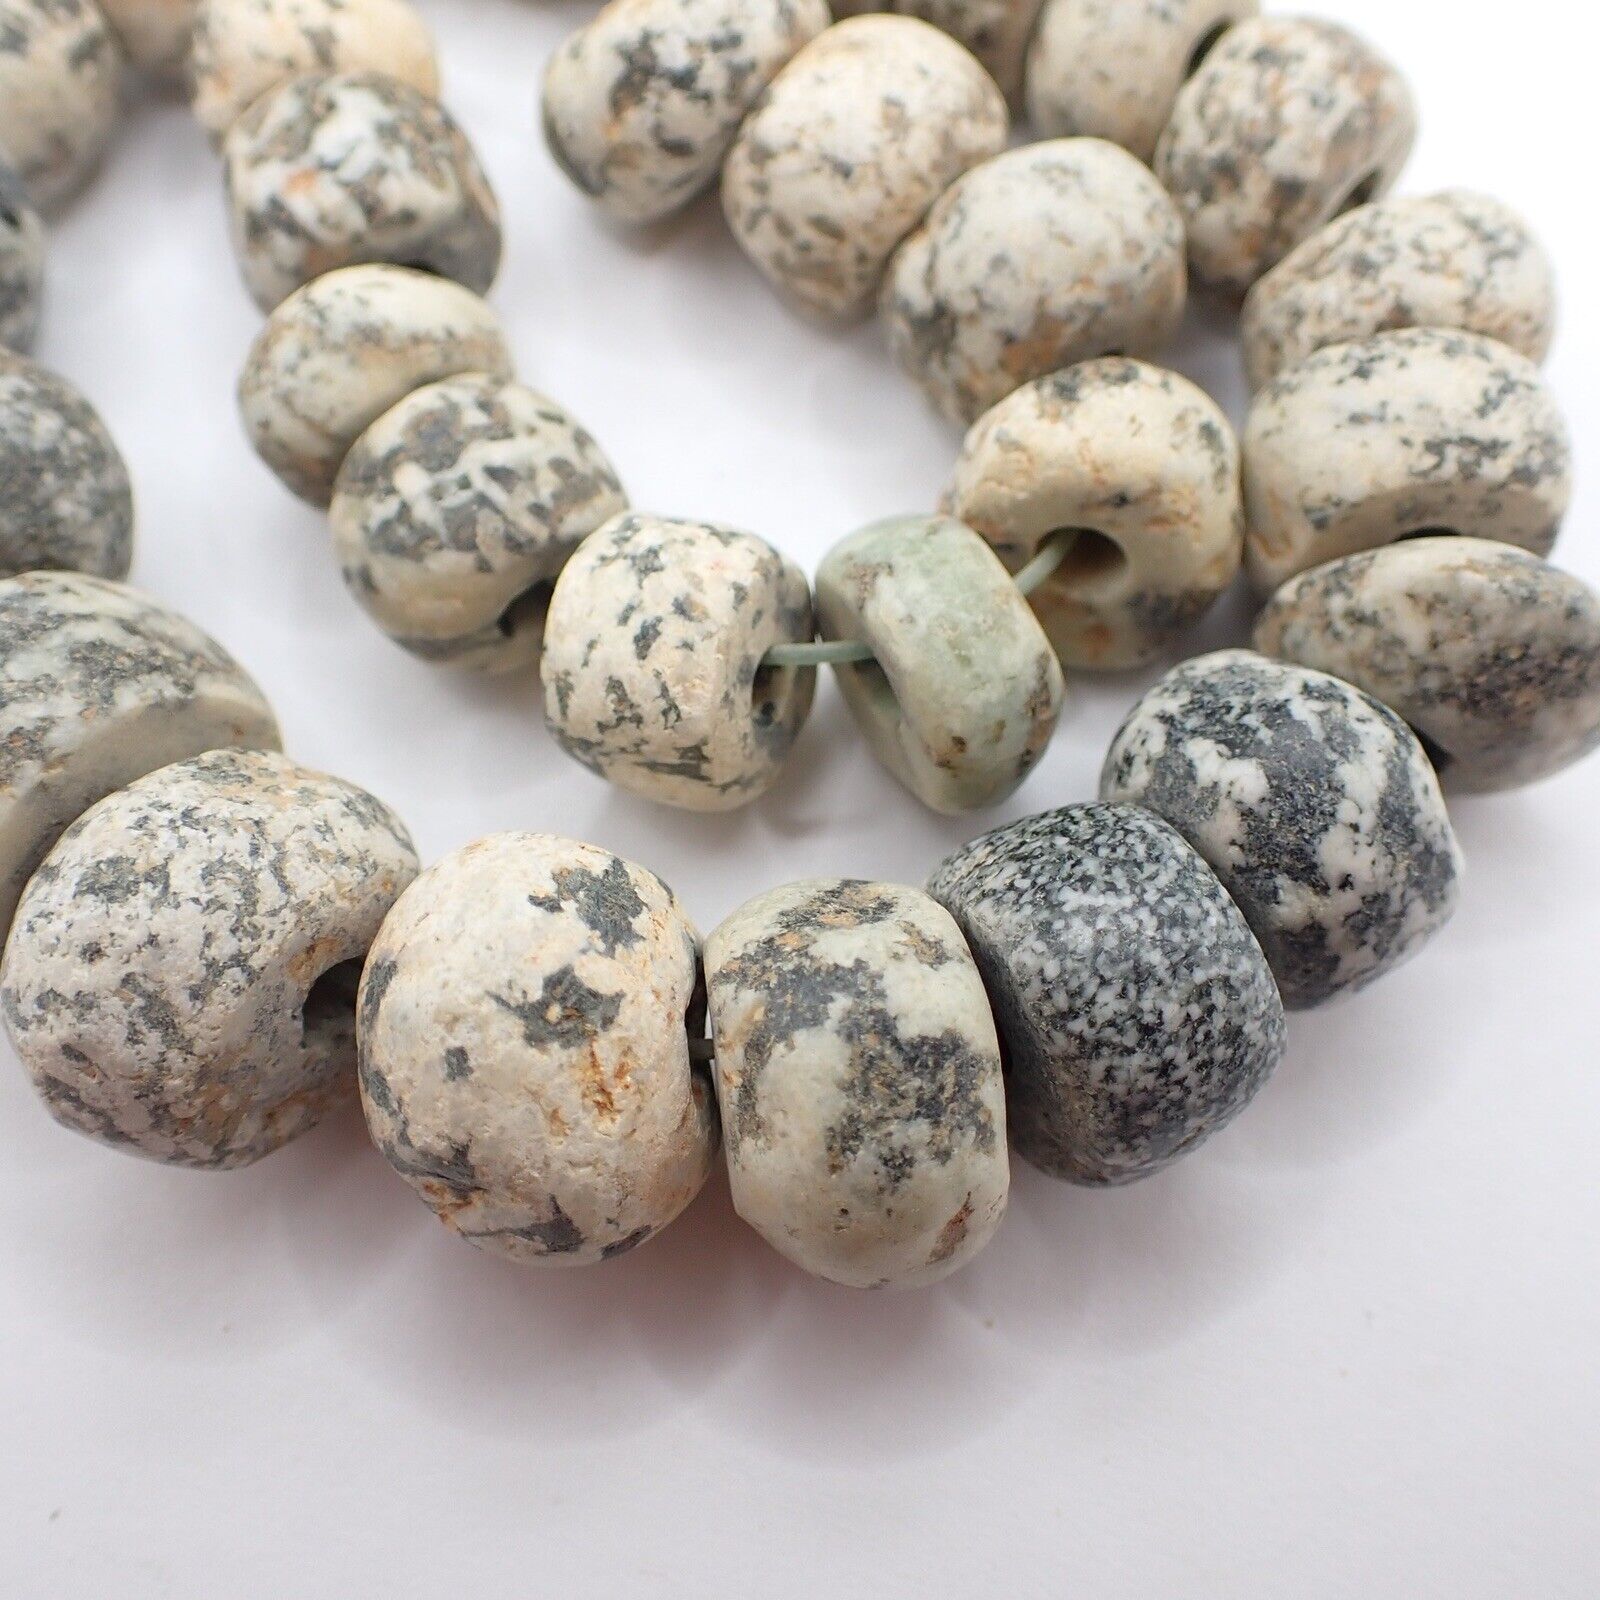 30 pcs MALI GRANITE STONE African Dogon trade beads ancient old antique